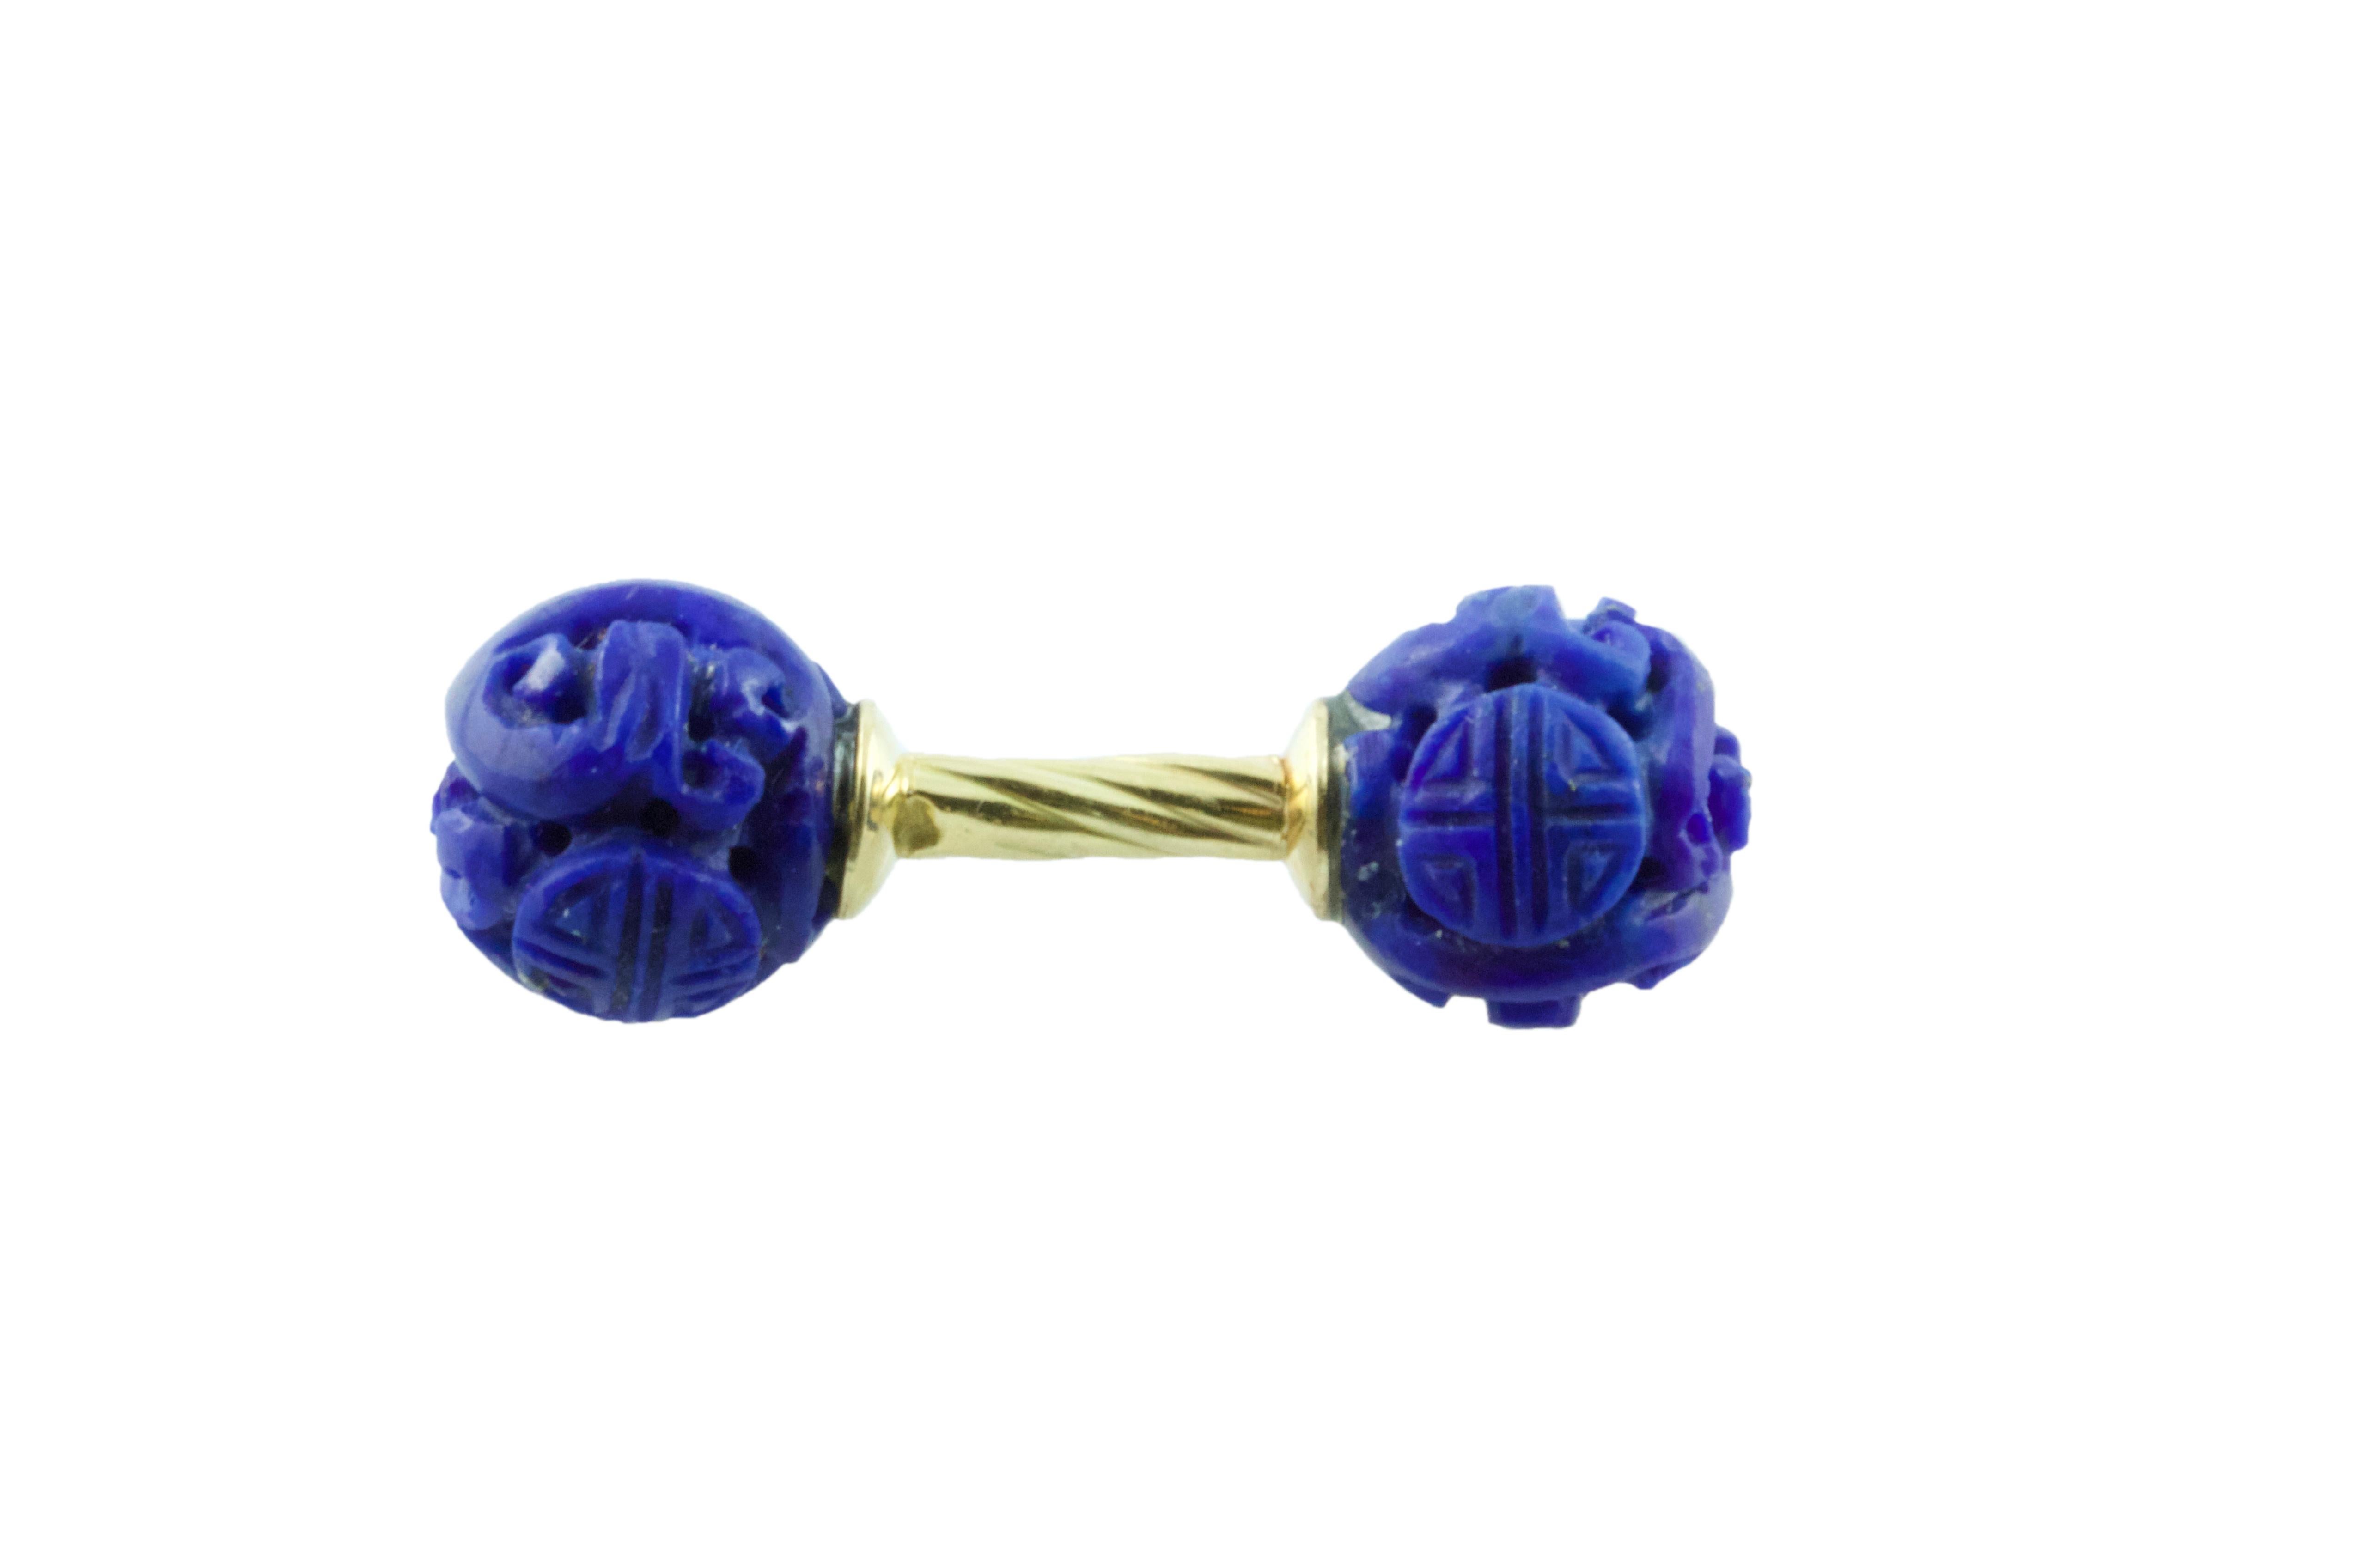 Simple and timeless, these cufflinks are a classic addition to any attire. Their front face and toggle are identical and are carved in a spherical shape out of lapis lazuli, whose dark blue shade strikingly complements the 18k yellow gold of the